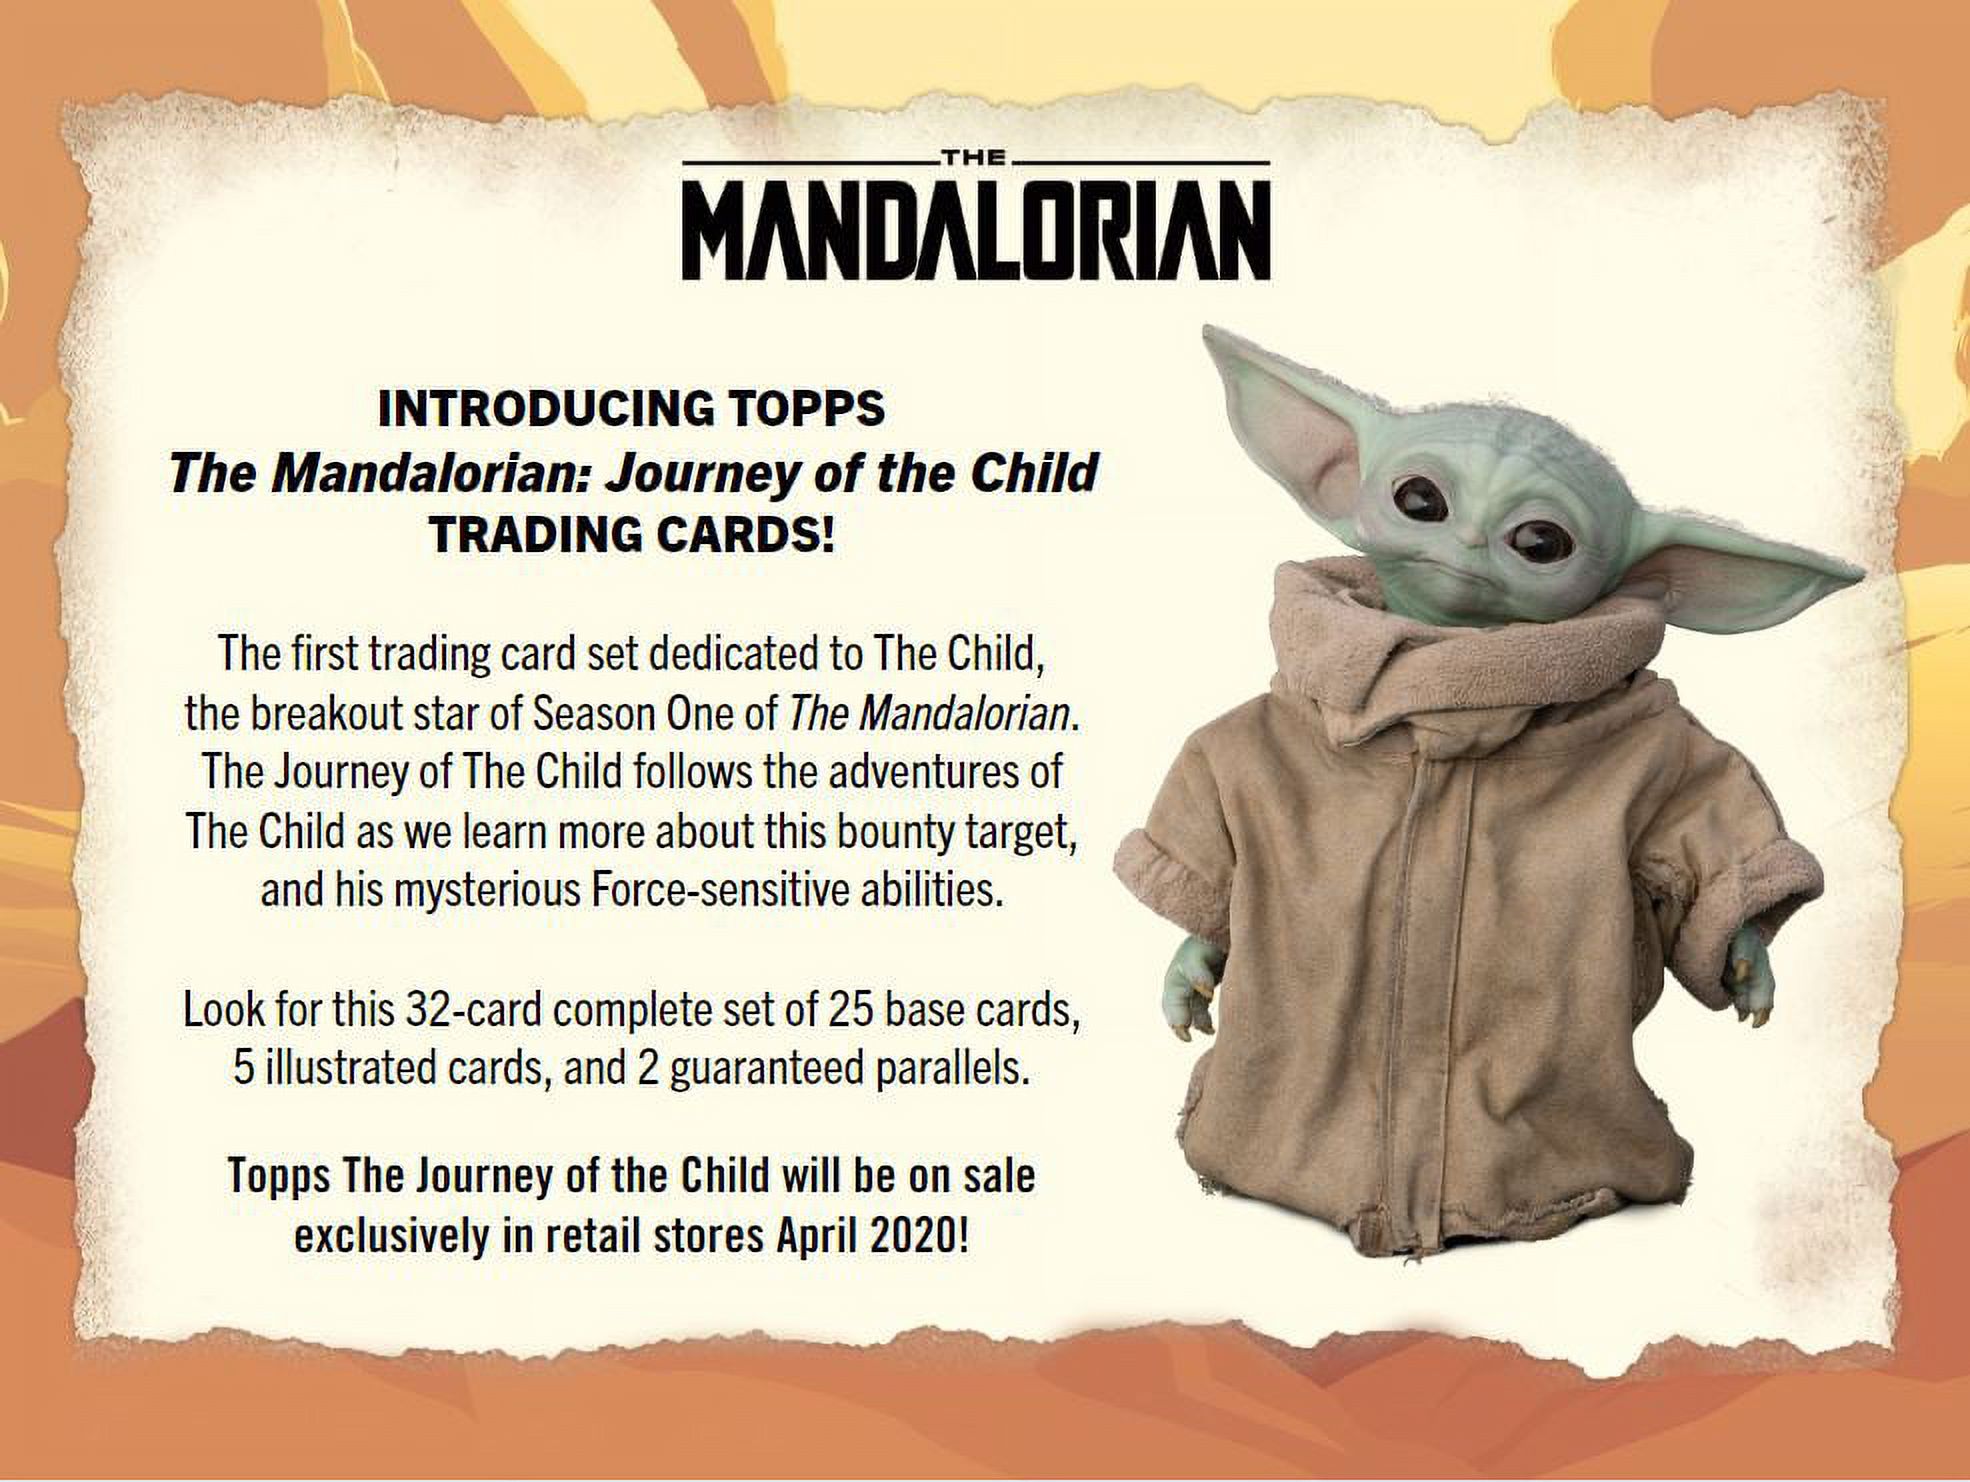 Topps the Mandalorian: Journey of the Child Star Wars Trading Cards Blaster Box- Featuring Baby Yoda - image 3 of 3